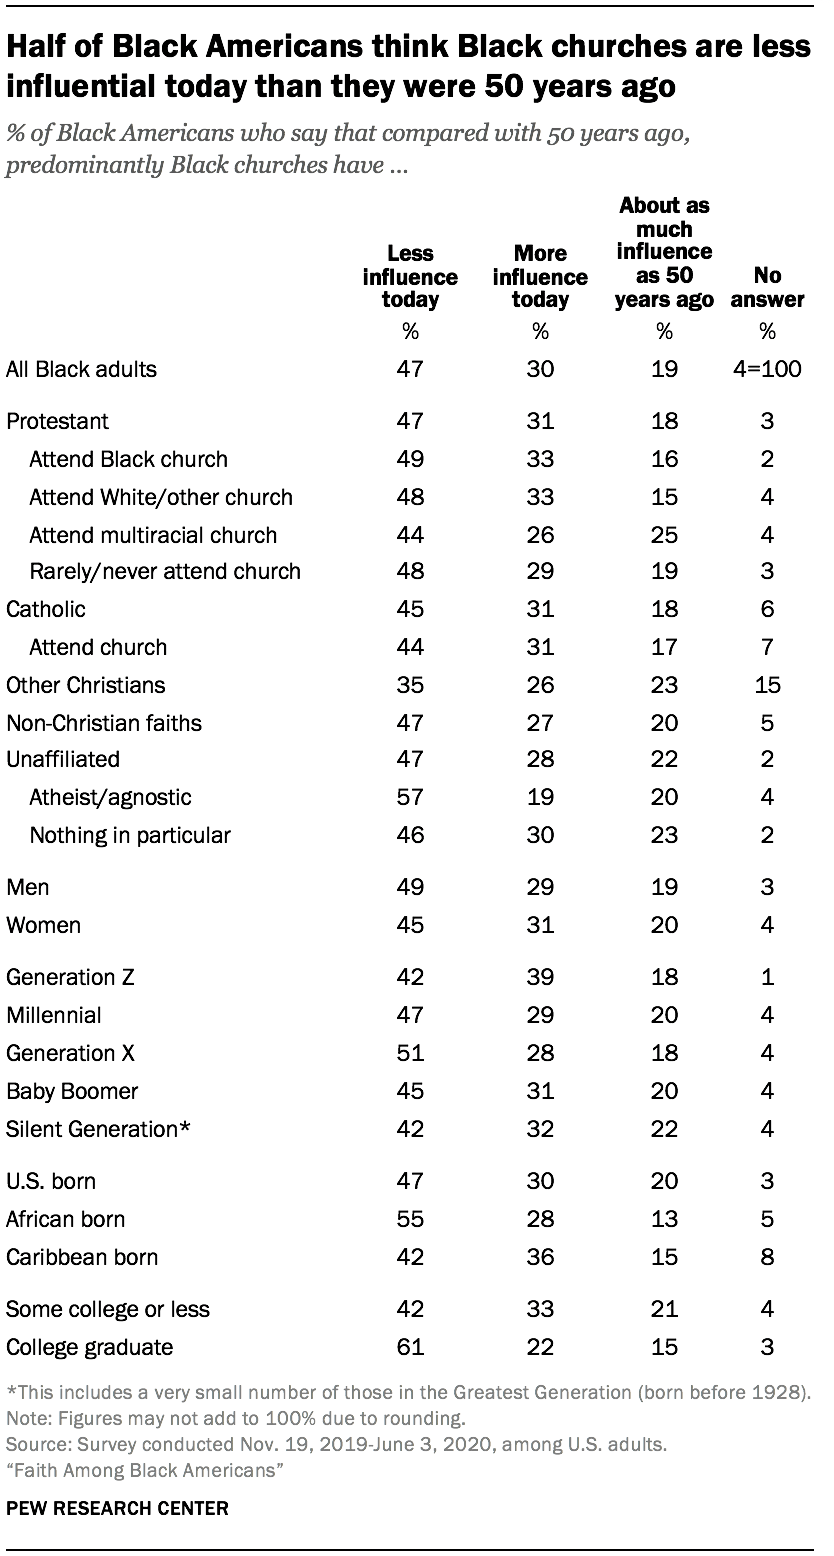 Half of Black Americans think Black churches are less influential today than they were 50 years ago